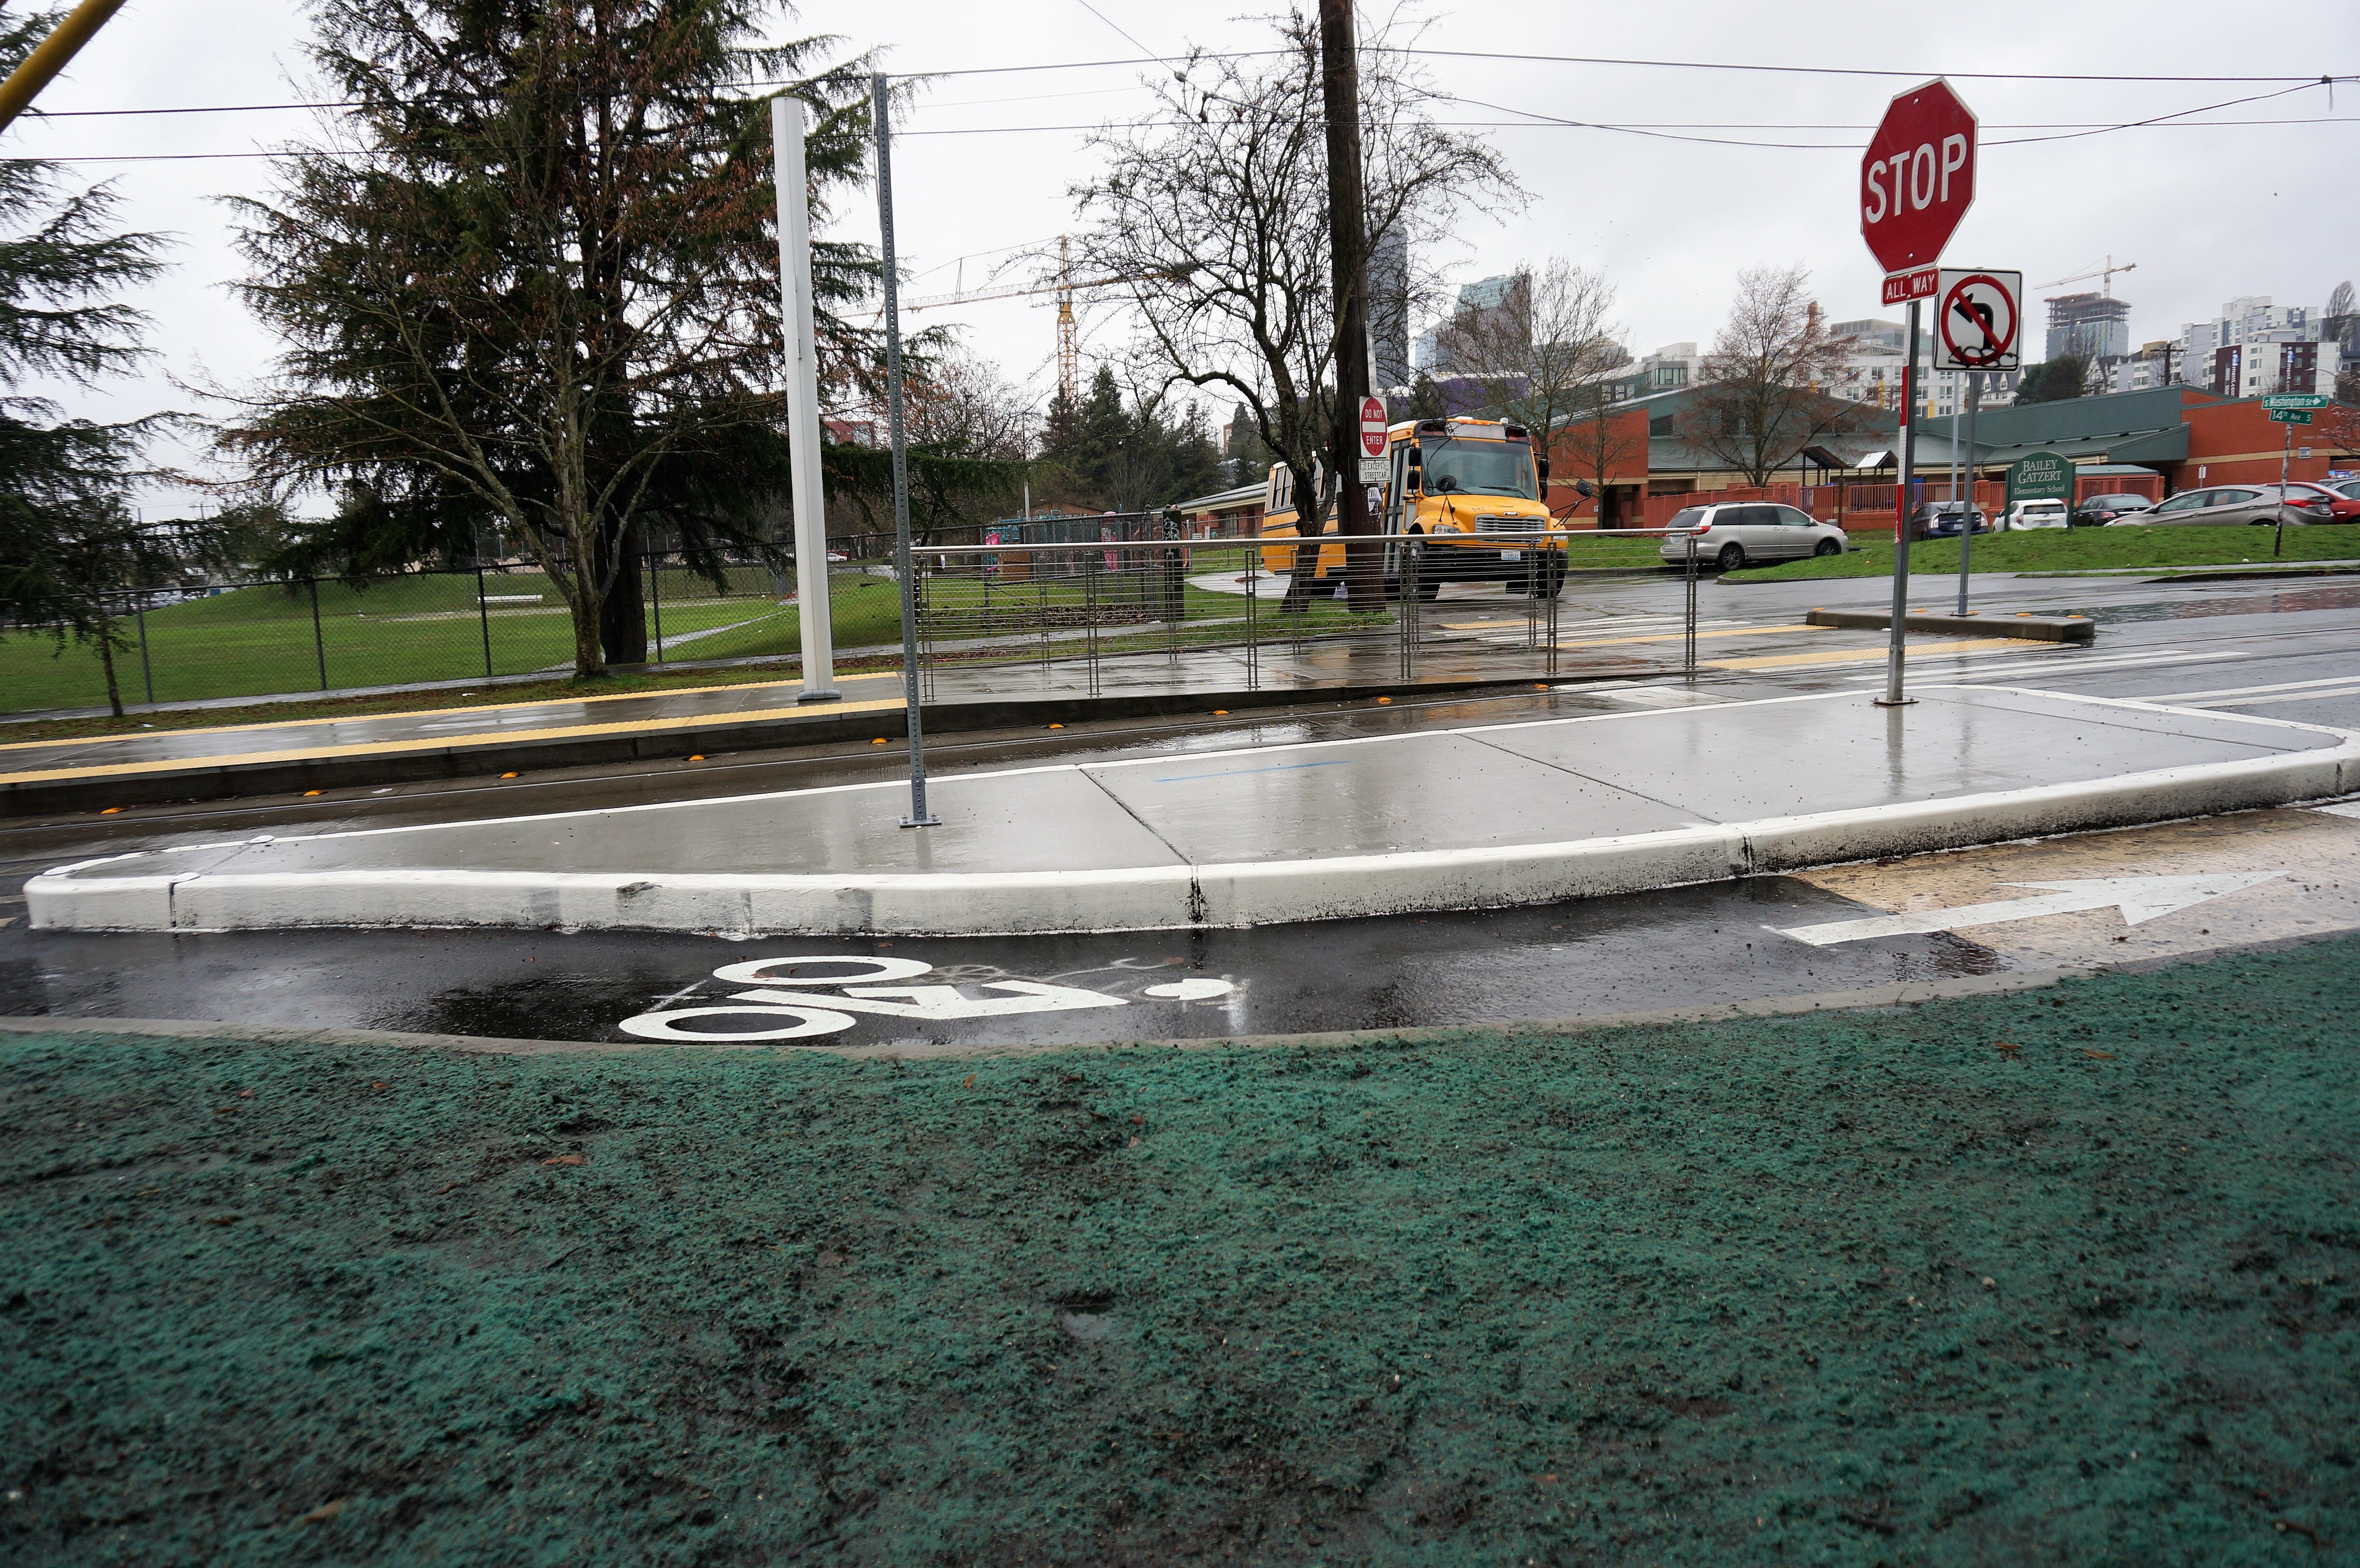 New medians at the intersection of S Washington and 14th Ave S near Bailey Gatzert Elementary. (Image 1 of 2)